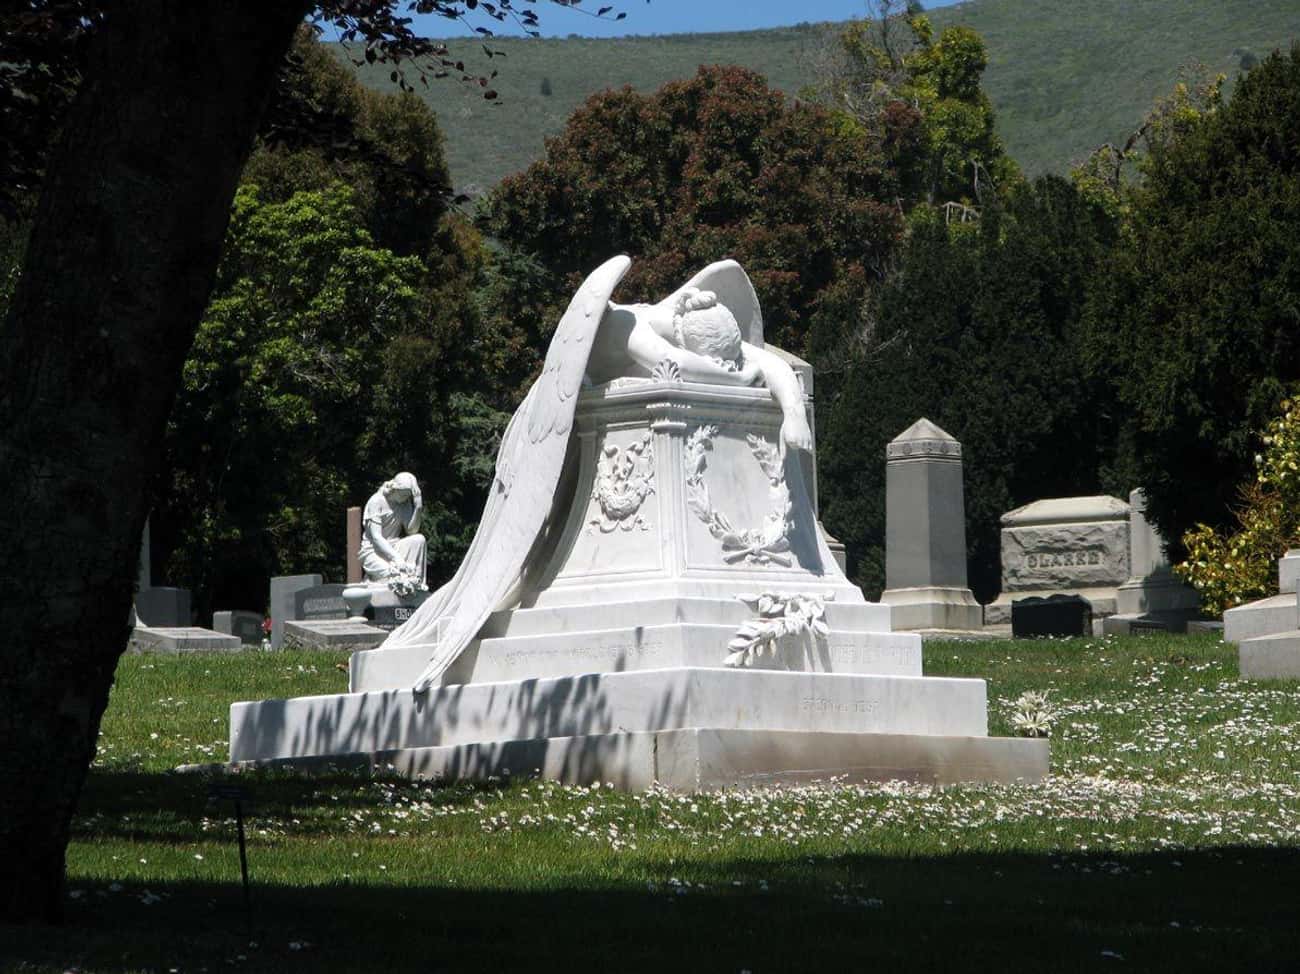 Land Value Issues Led To Colma Becoming San Francisco&#39;s Cemetery City